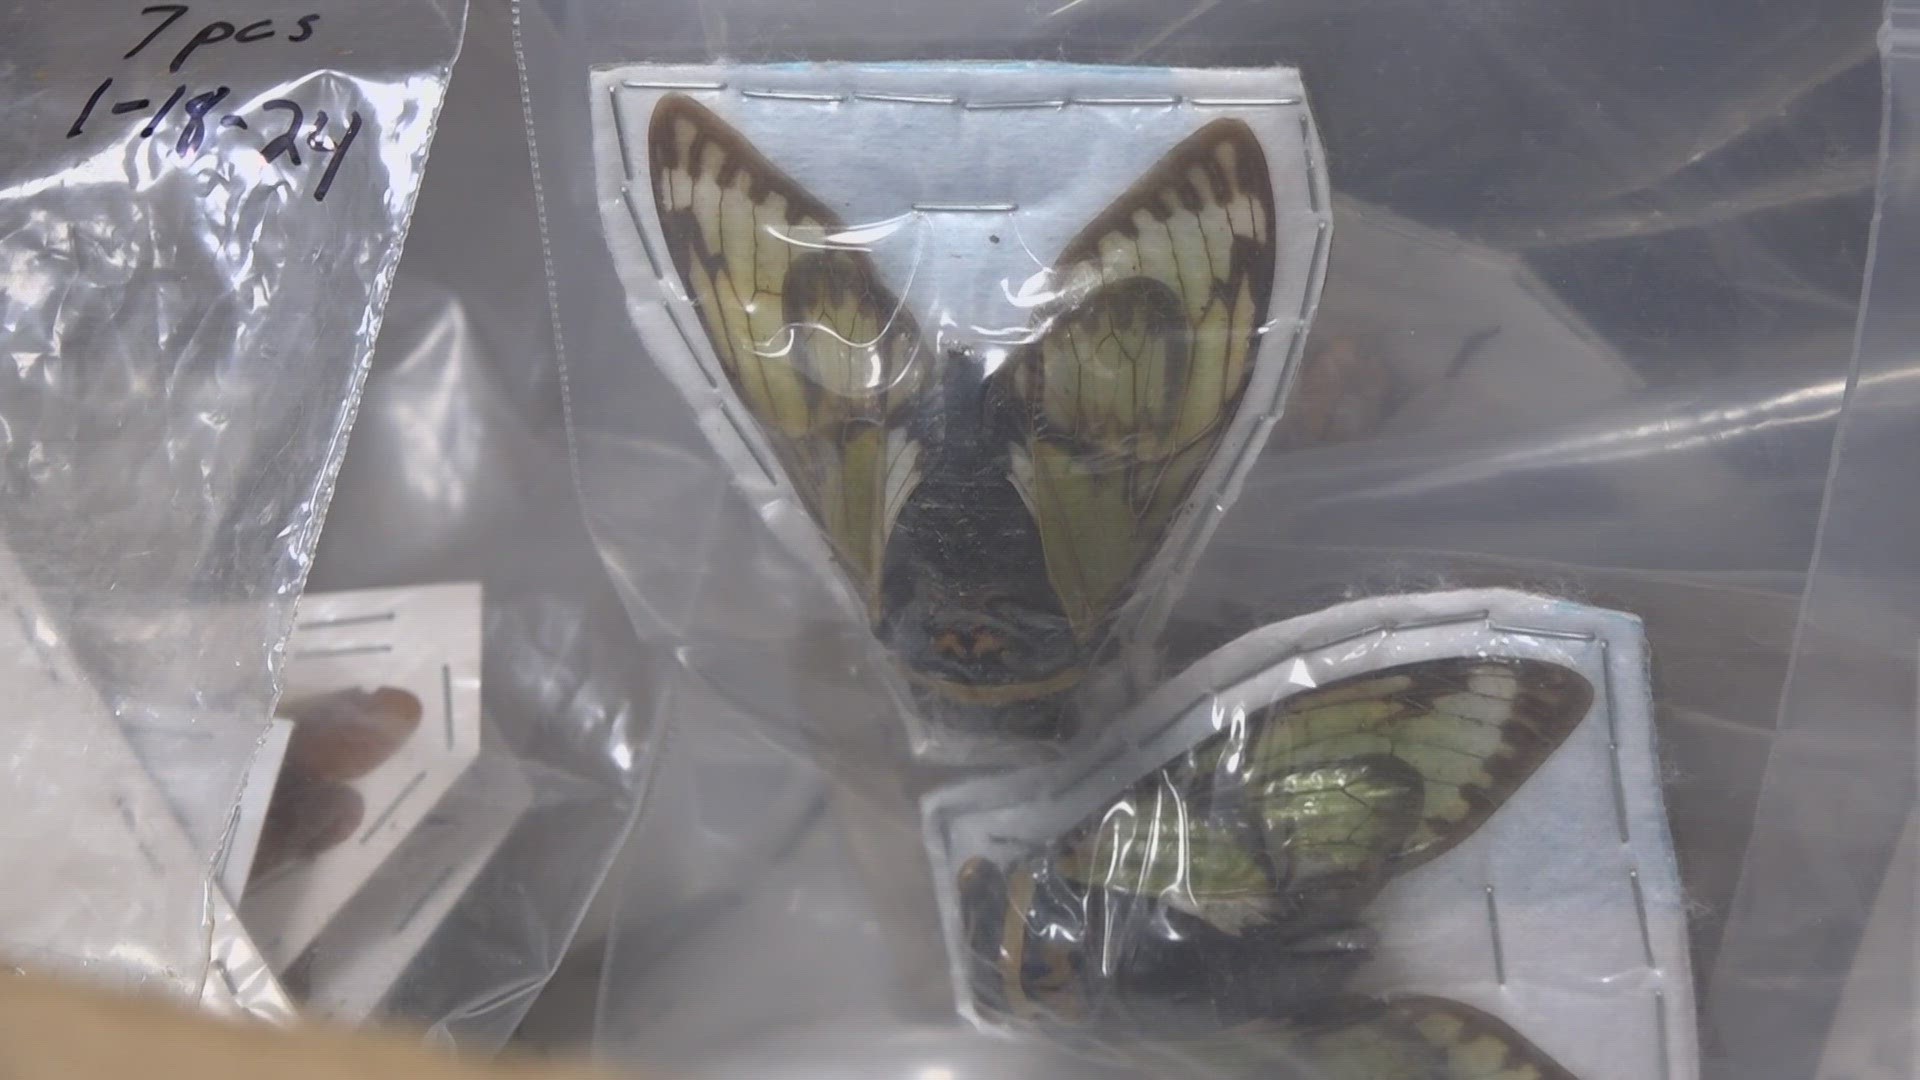 Arizona State University is in possession of thousands of insects smuggled across the border illegally.